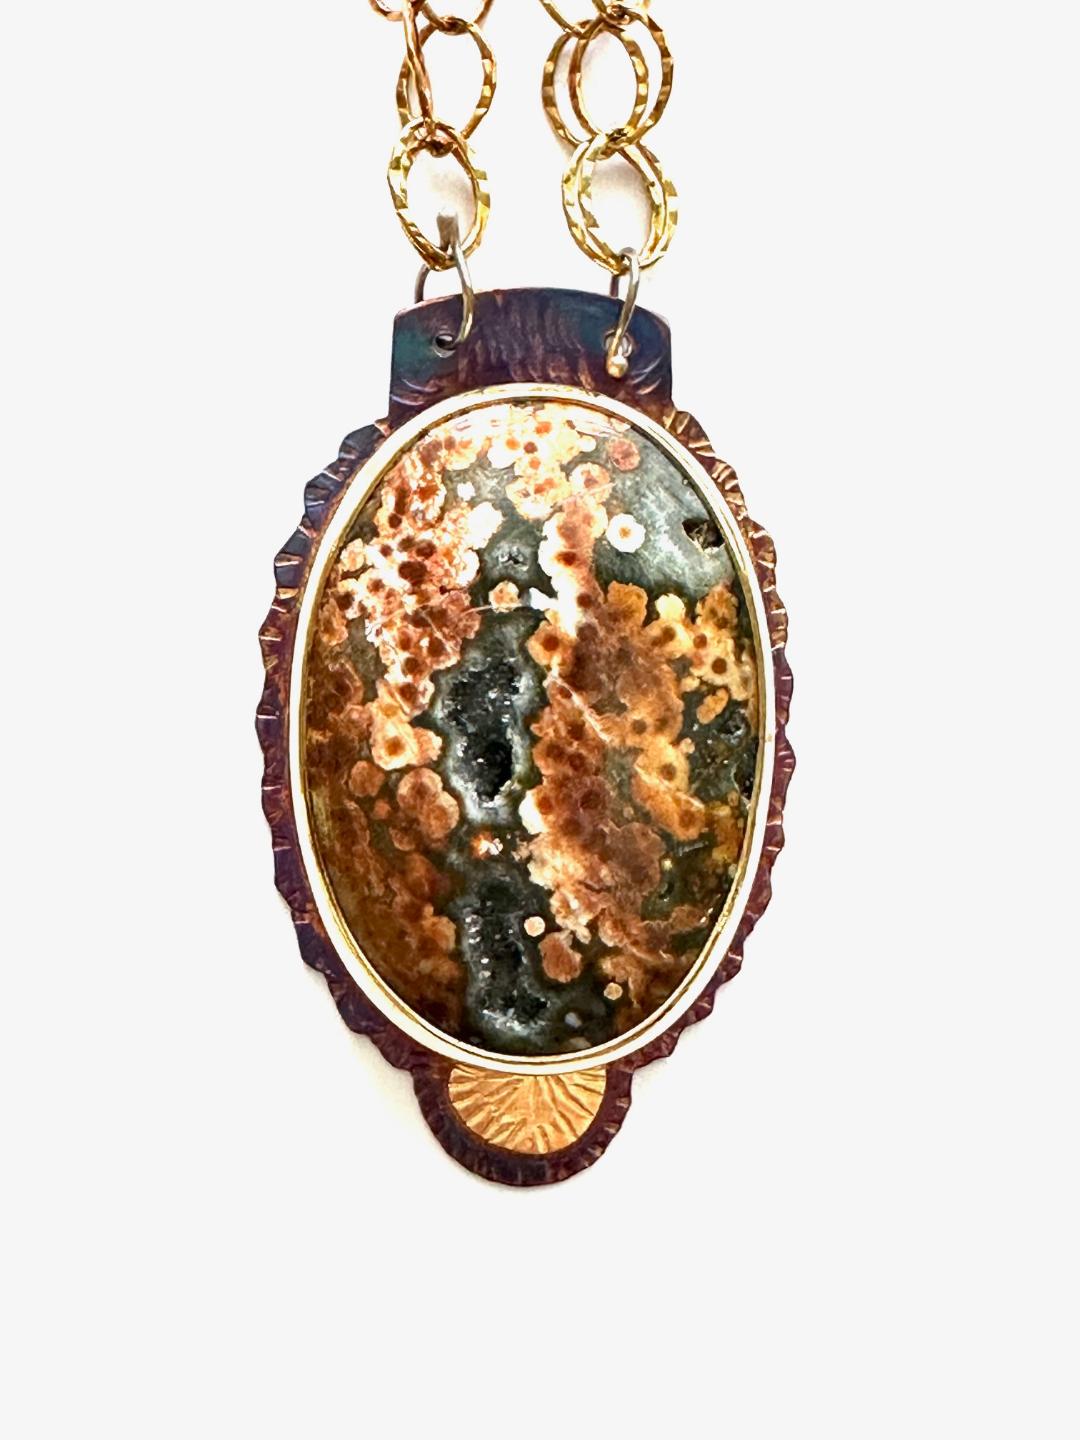 Sterling Silver, Fine Silver Bezel, 18k Gold, and Orbicular Jasper with Quartz Crystals Popping Through Necklace with Sterling Silver Chain and Lobster Clasp